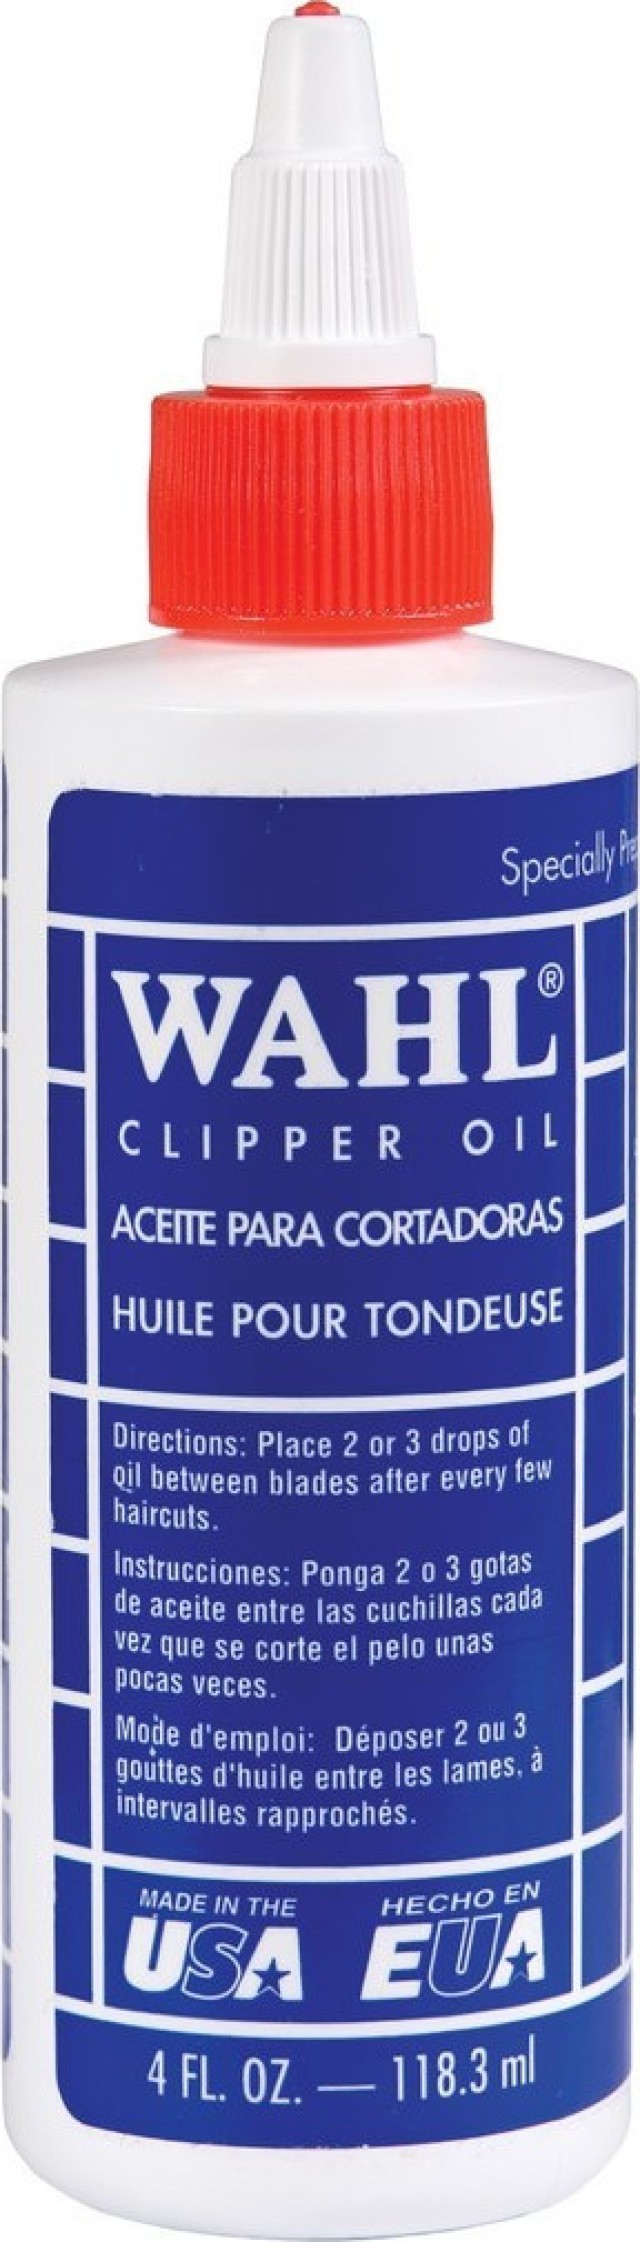 Wahl Clipper Oil 118ml Lubricant for Clippers